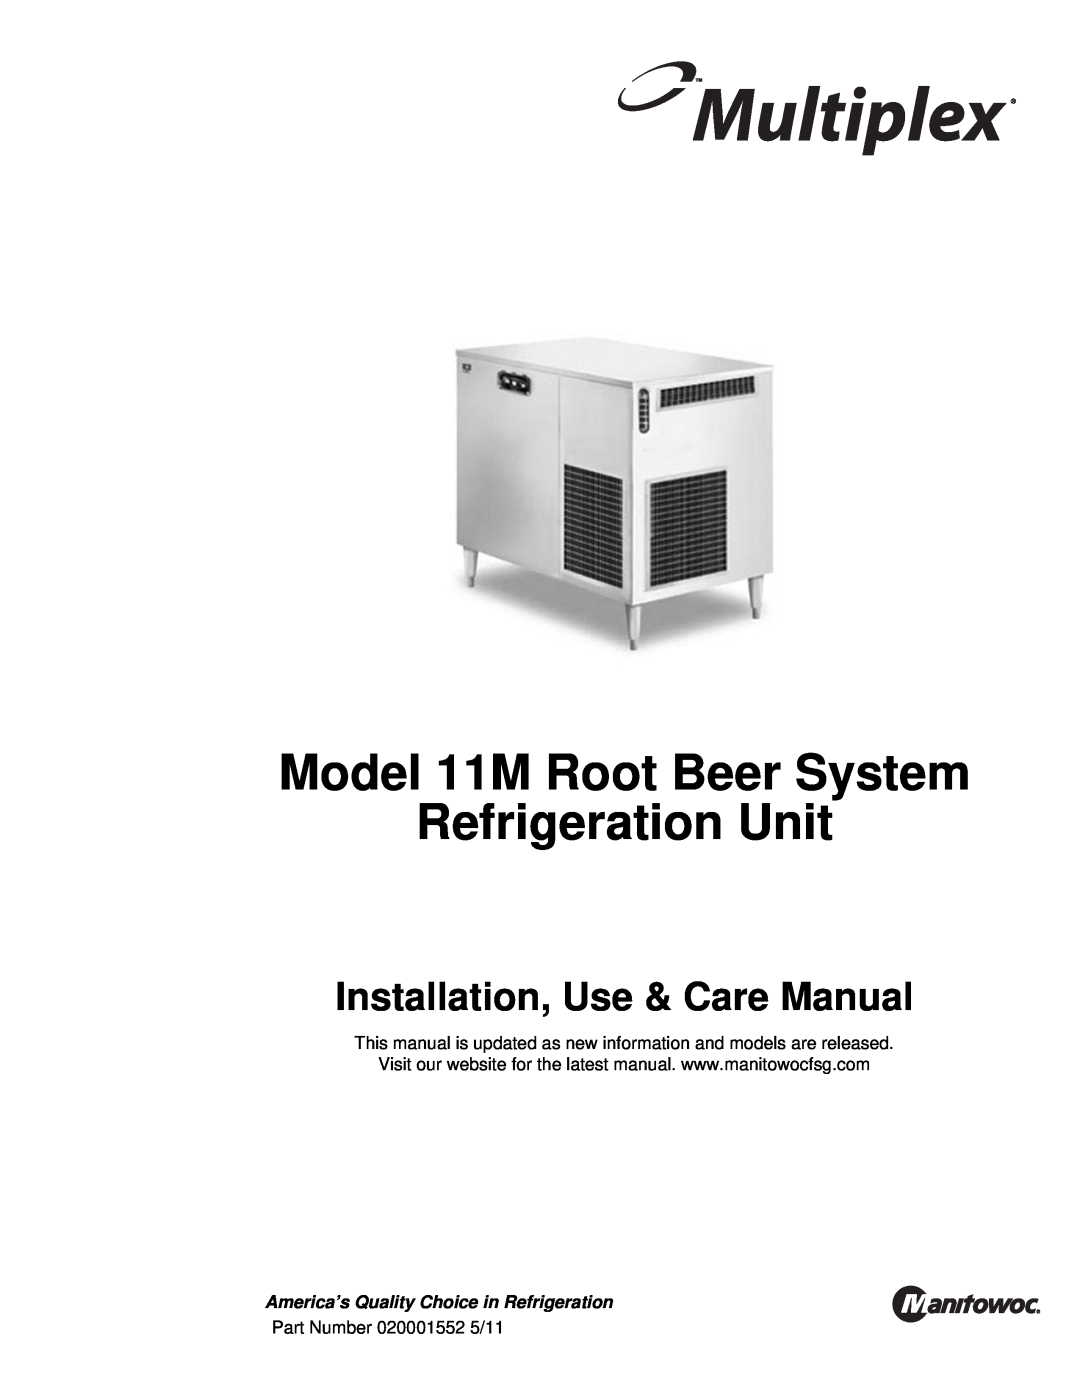 Manitowoc Ice manual Model 11M Root Beer System Refrigeration Unit, Installation, Use & Care Manual 